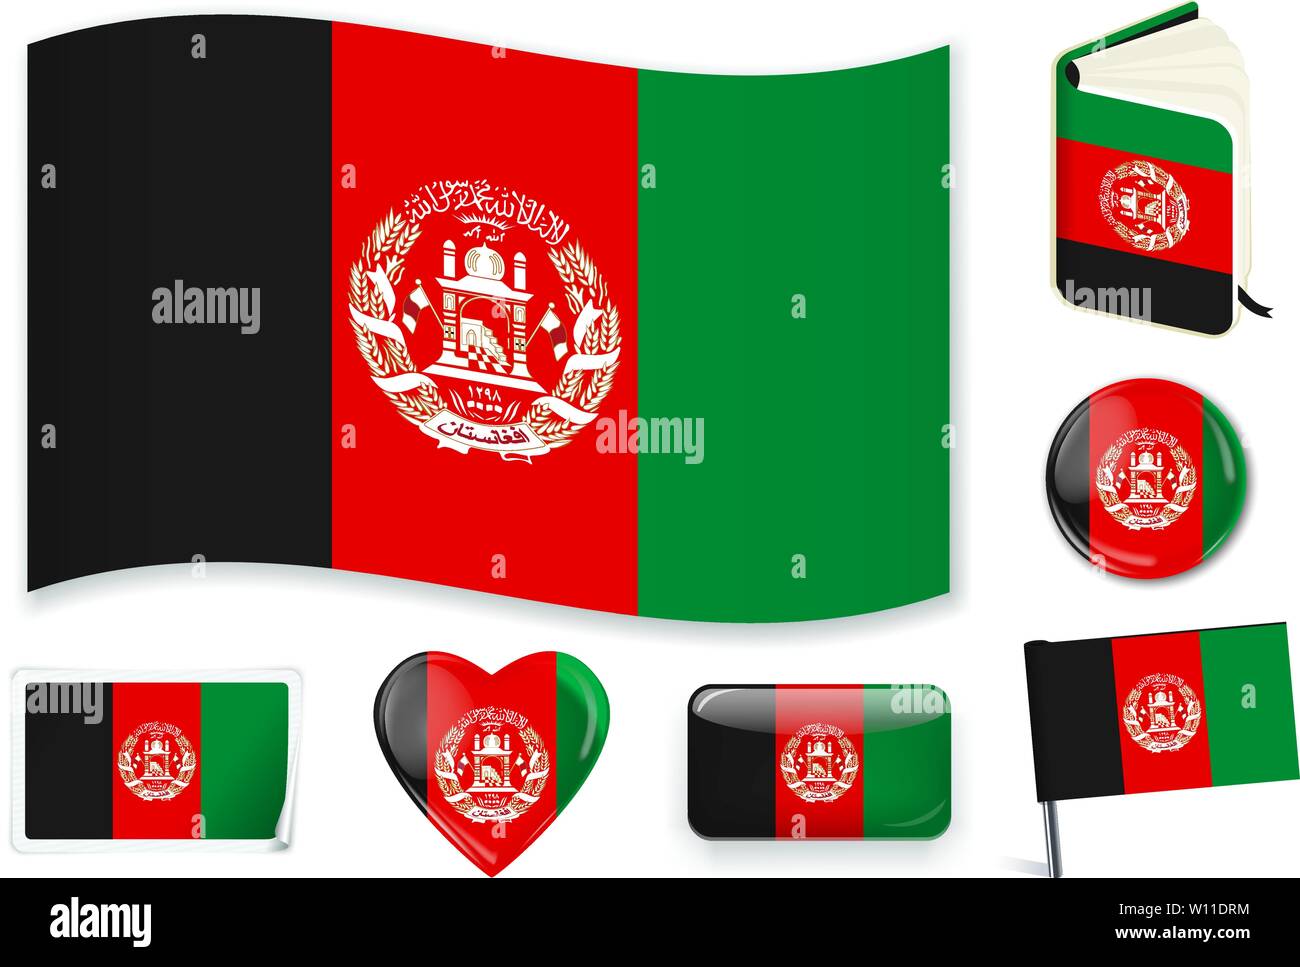 Download wallpapers flag of afghanistan for desktop free High Quality HD  pictures wallpapers  Page 1